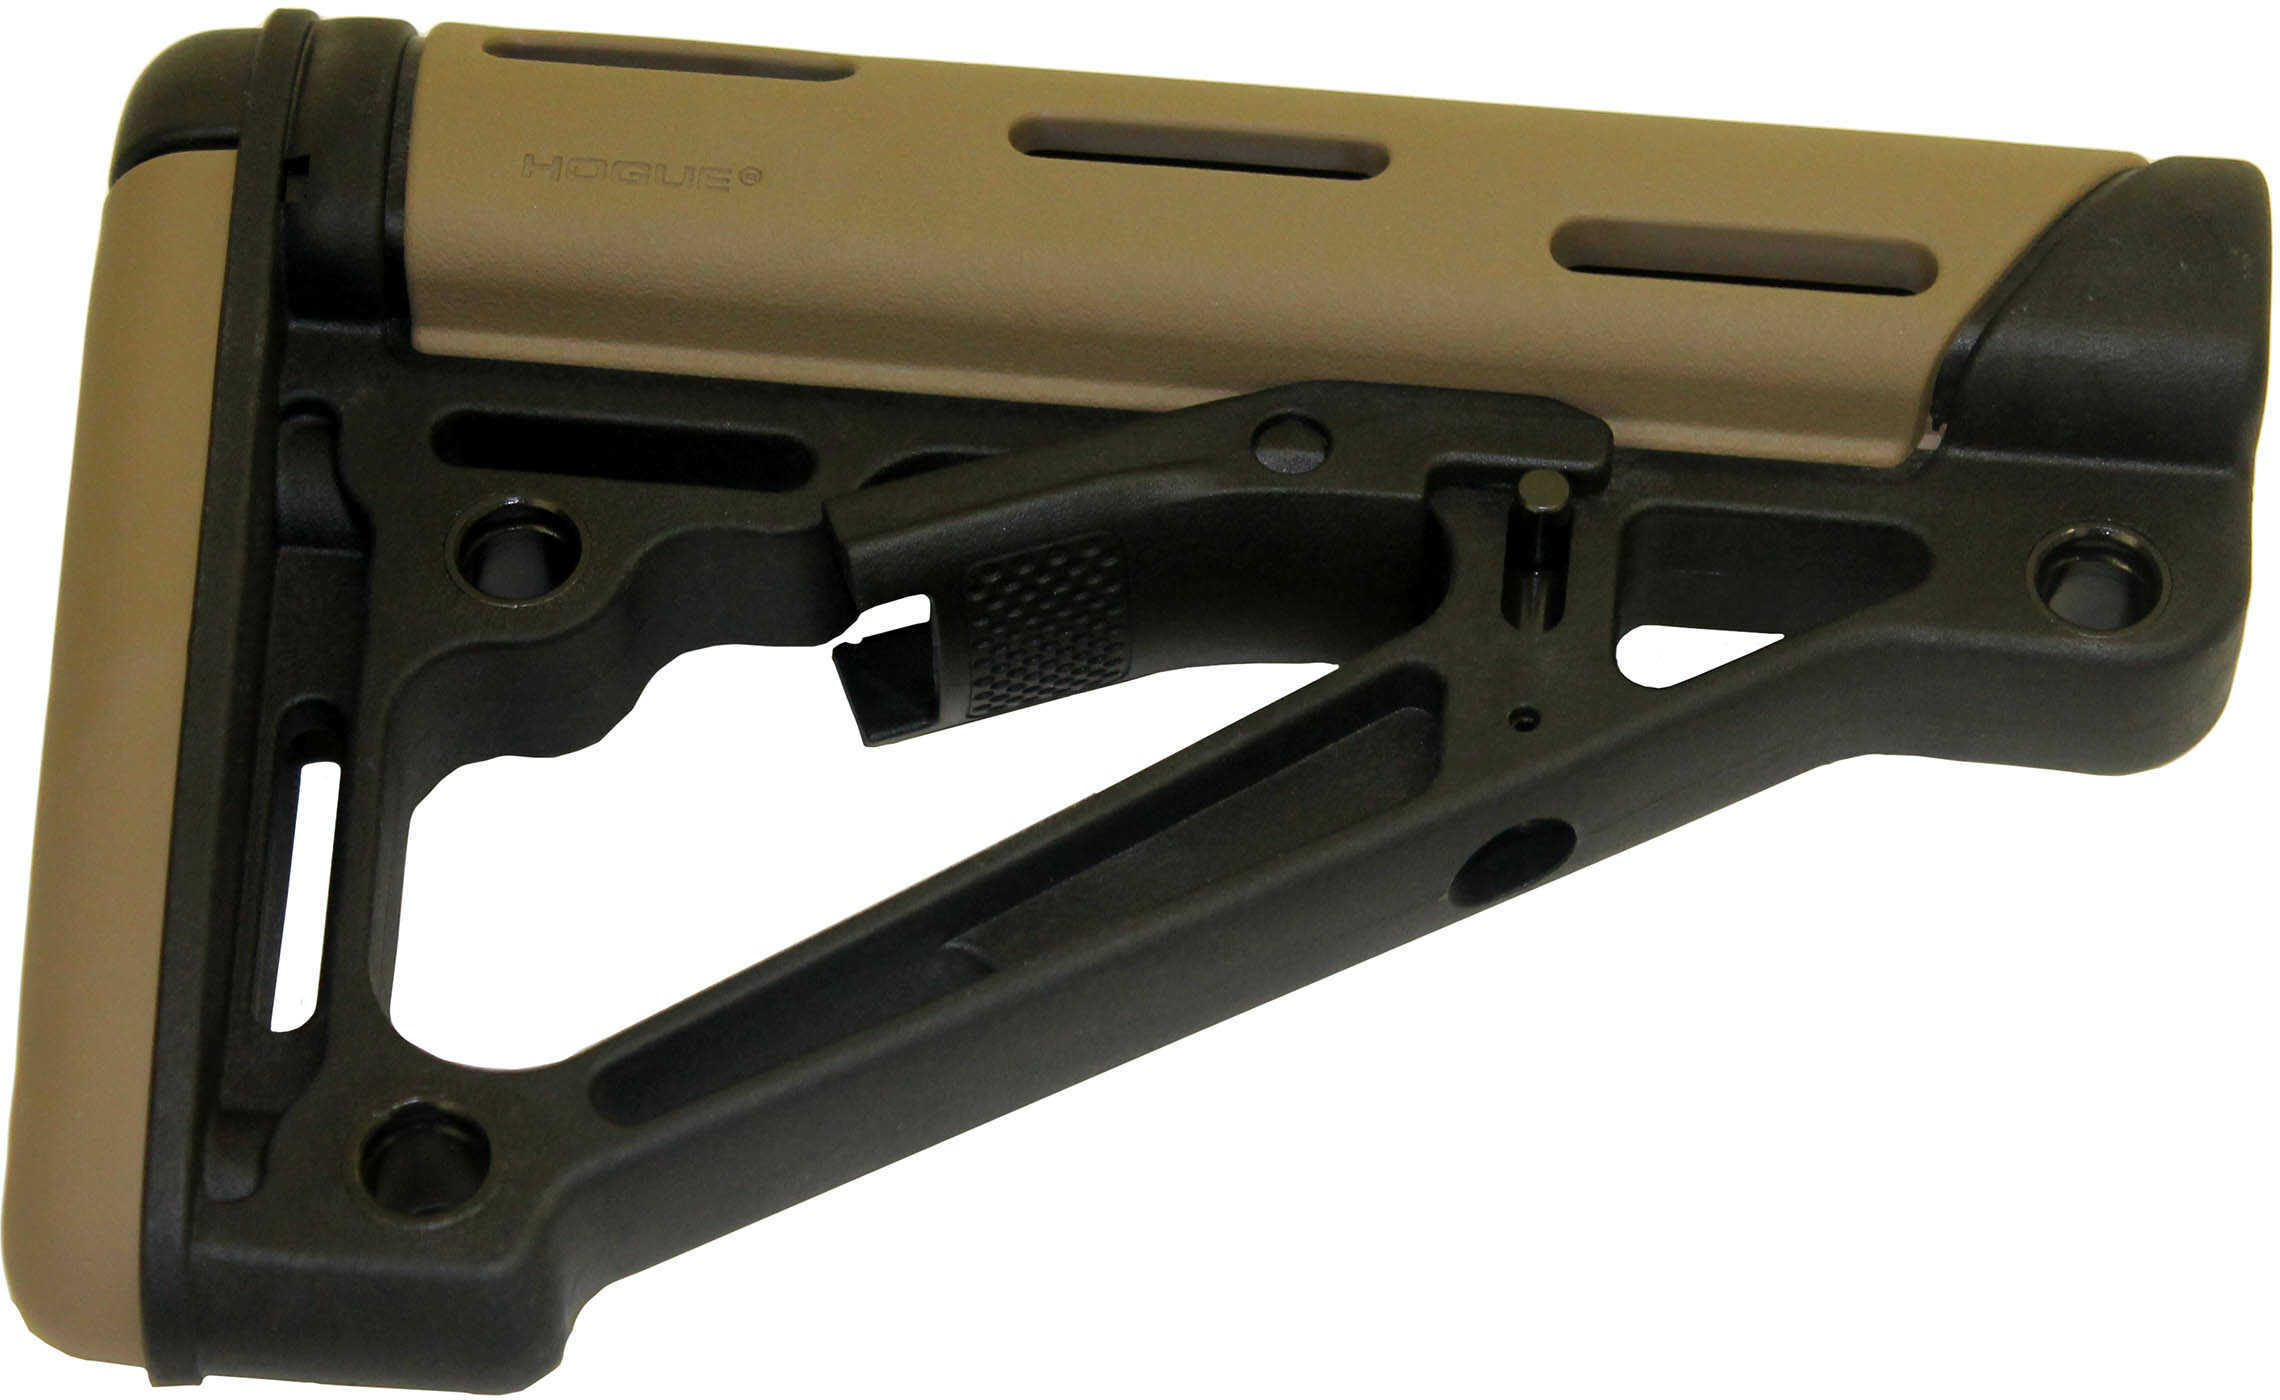 AR-15 Overmolded Buttstock Collapsible Mil-Spec FDE Rubber